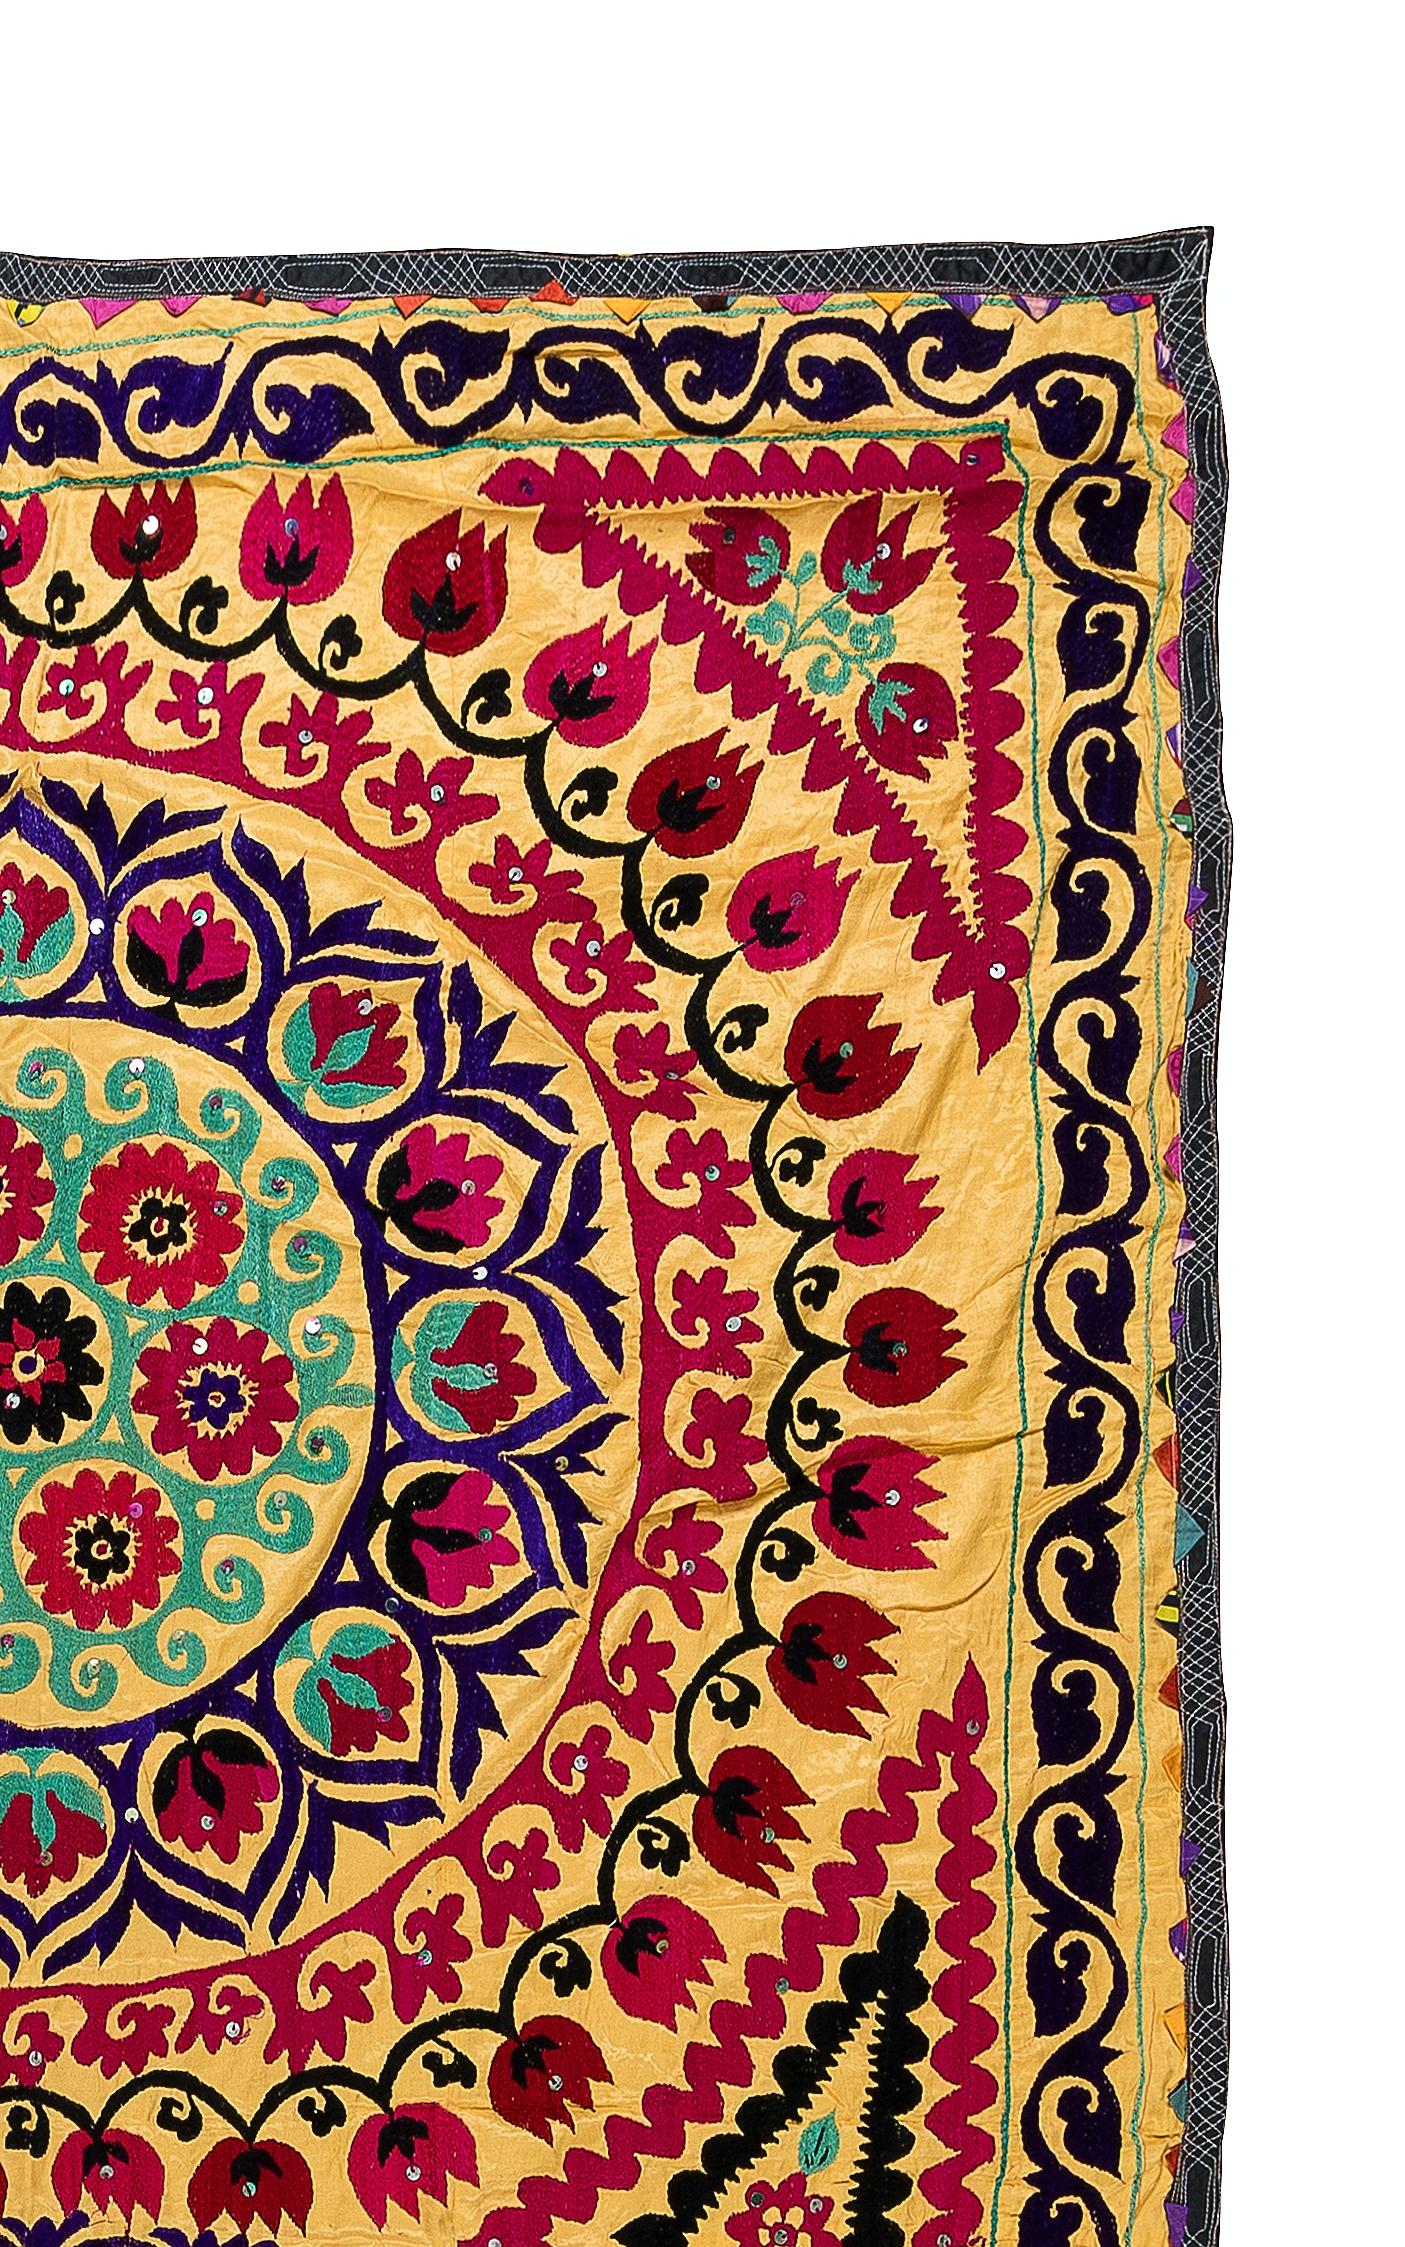 Embroidered 5x7.7 Ft Vintage Silk Embroidery Bed Cover, Uzbek Suzani Fabric Wall Hanging For Sale